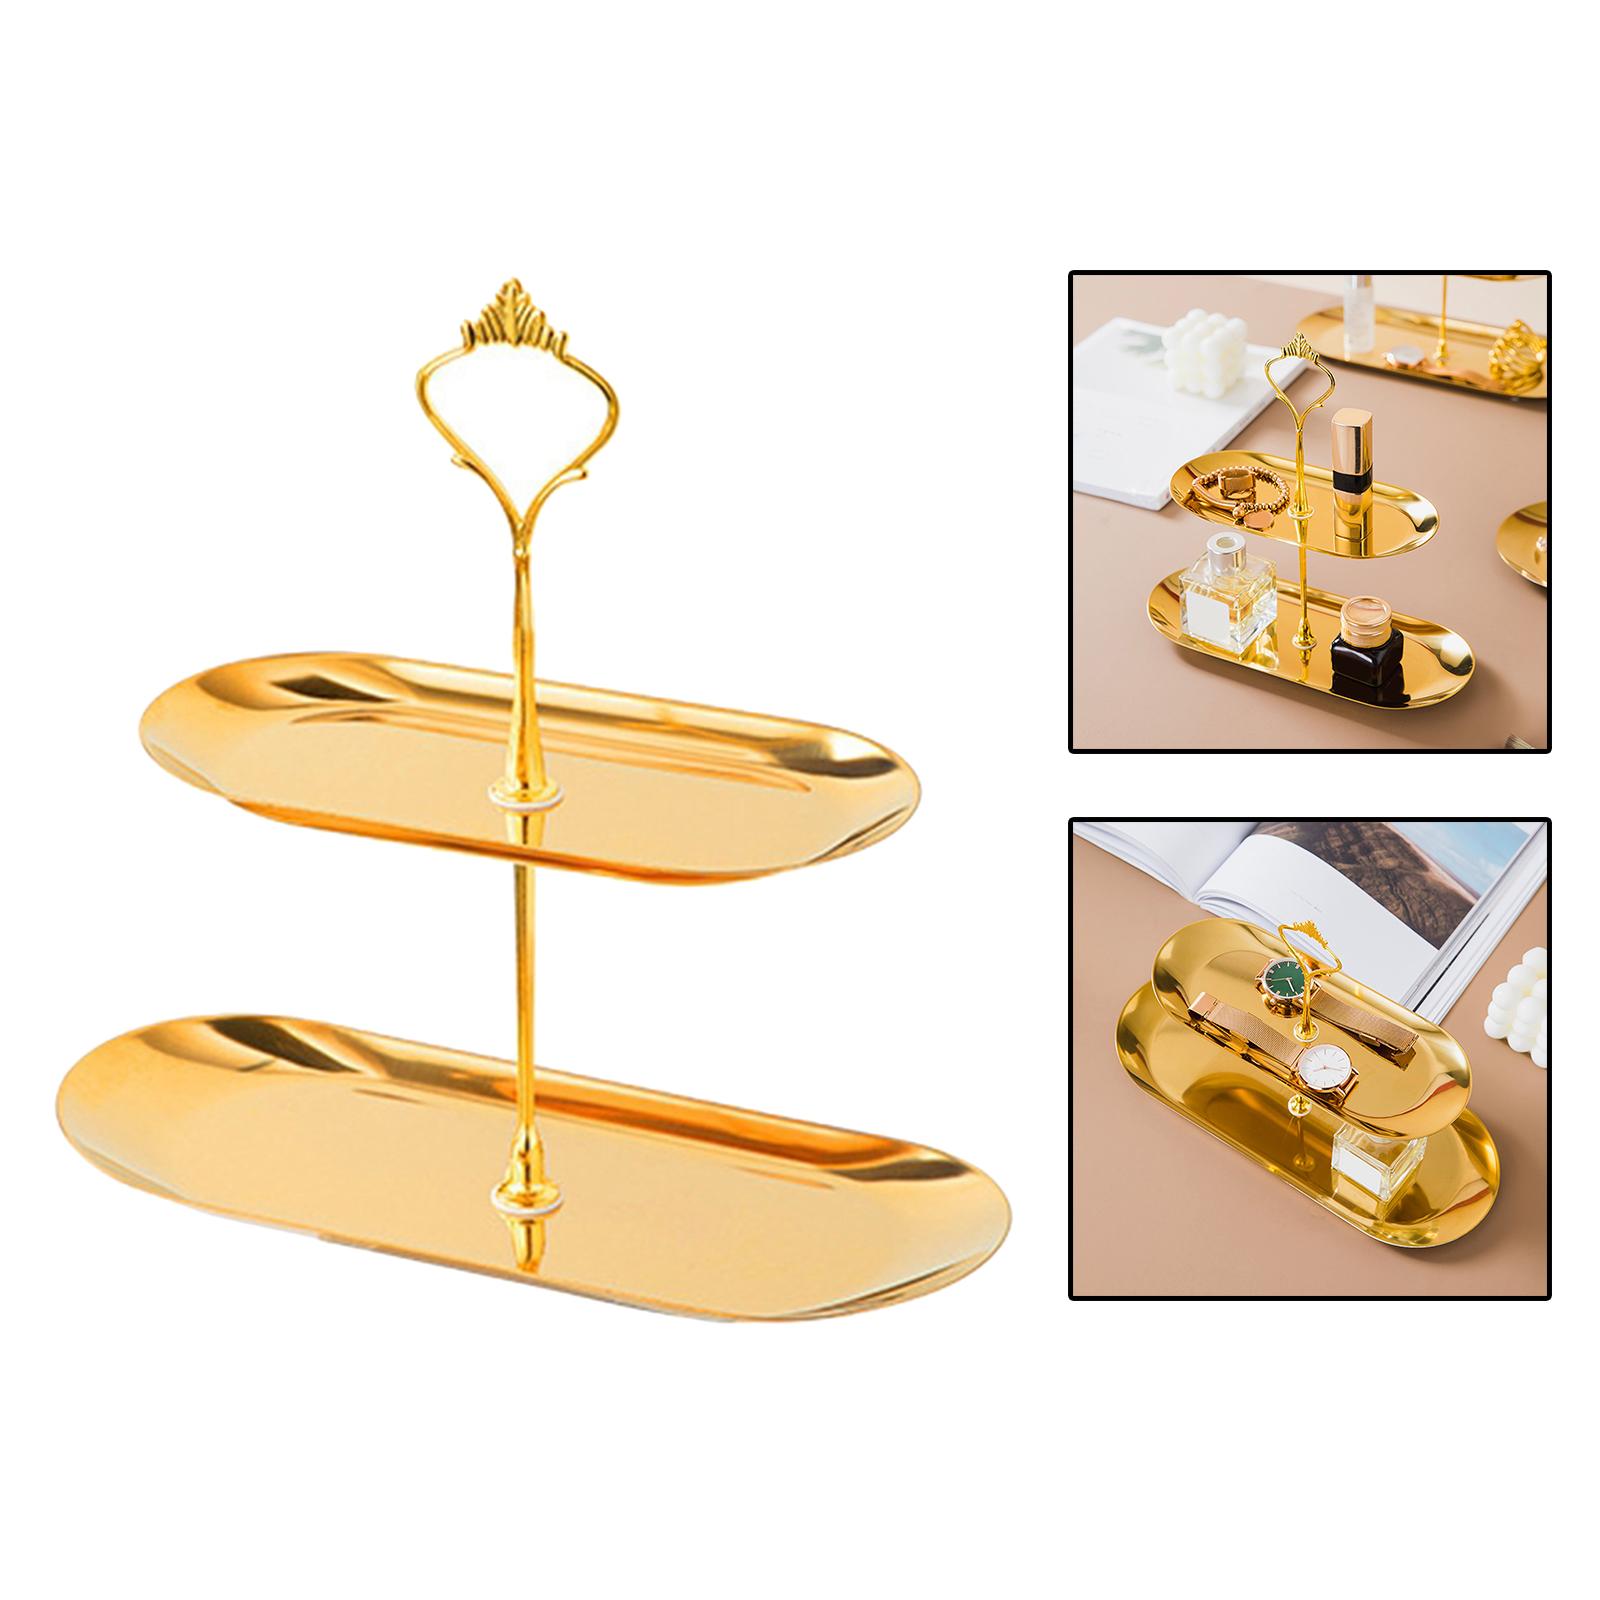 Gold Plated Stainless Steel Jewelry Tray Dish for Glasses Vanity Bathroom Small 2 Tier